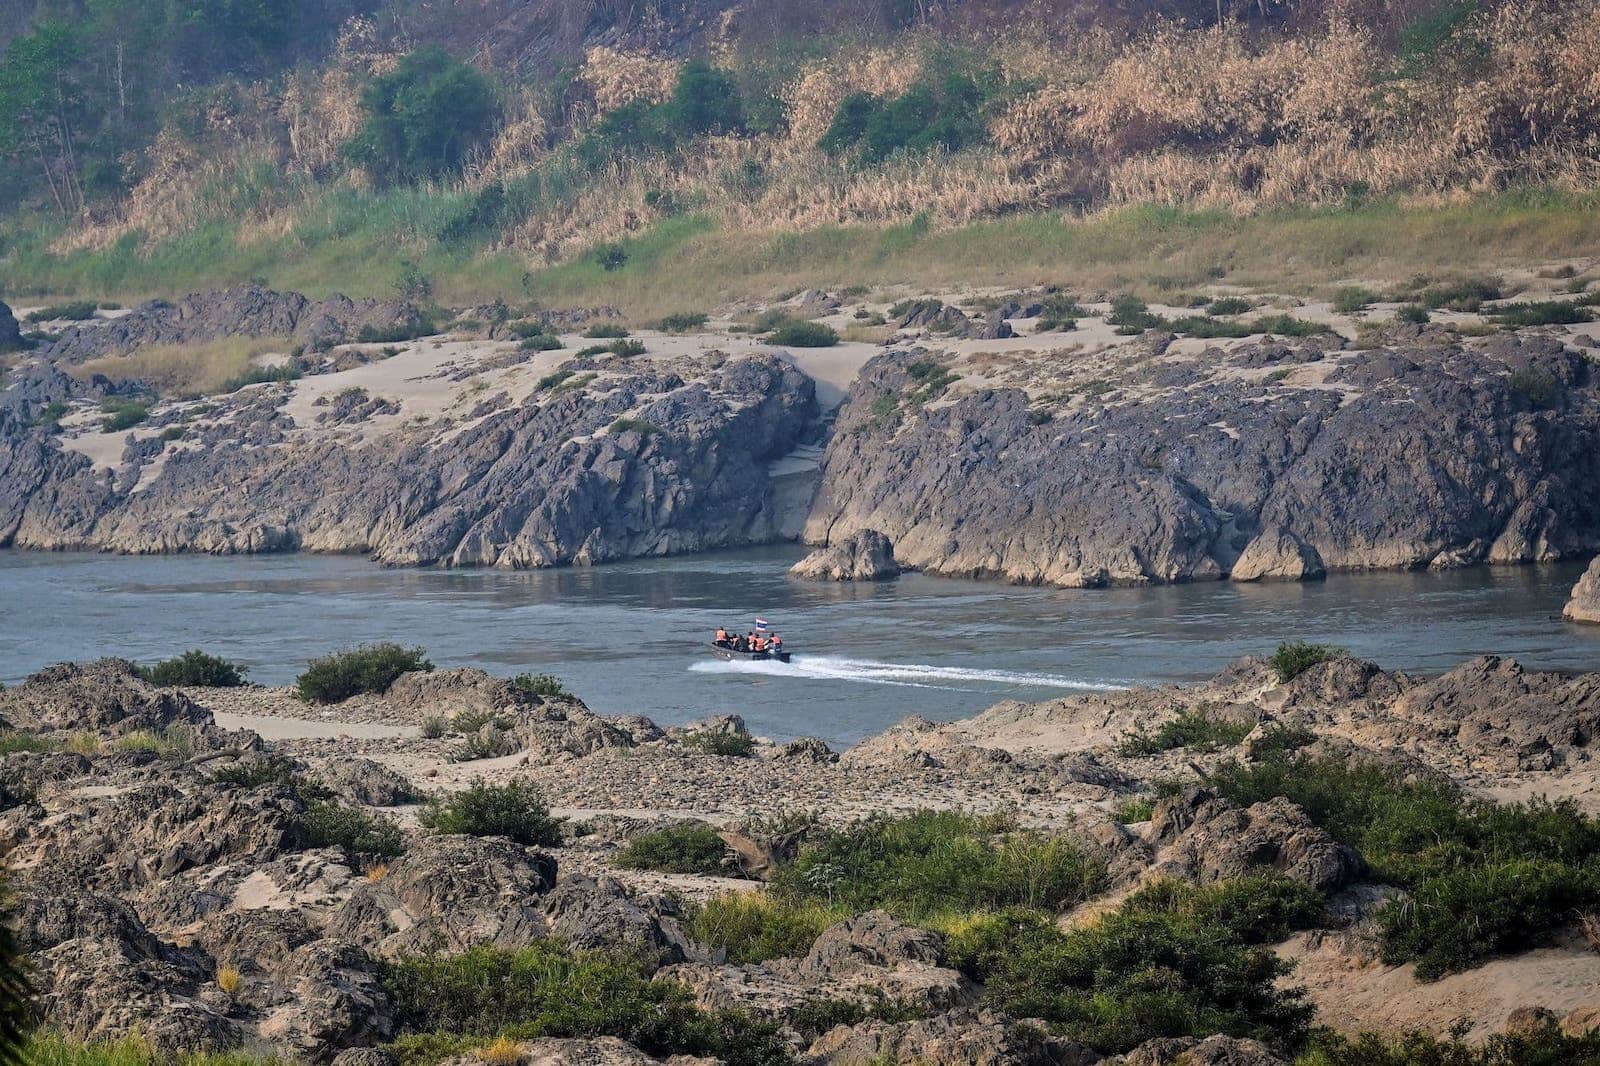 A boat flying the Thai flag patrols the Salween river following SAC airstrikes on villages in Karen State in March 2021.